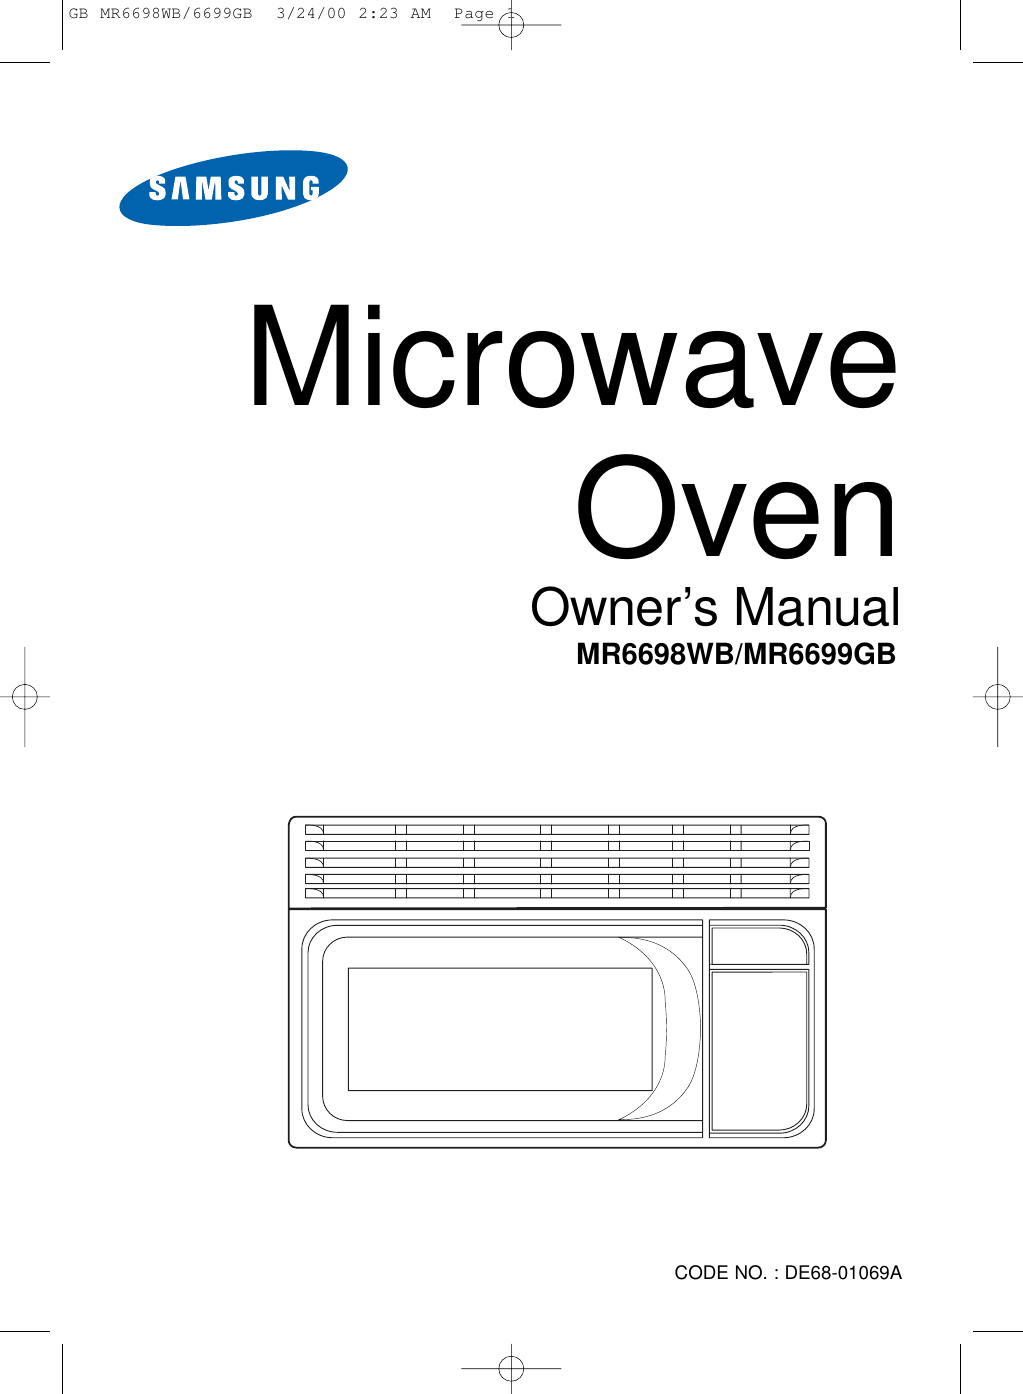 Microwave OvenOwner’s ManualCODE NO. : DE68-01069AMR6698WB/MR6699GBGB MR6698WB/6699GB  3/24/00 2:23 AM  Page 1